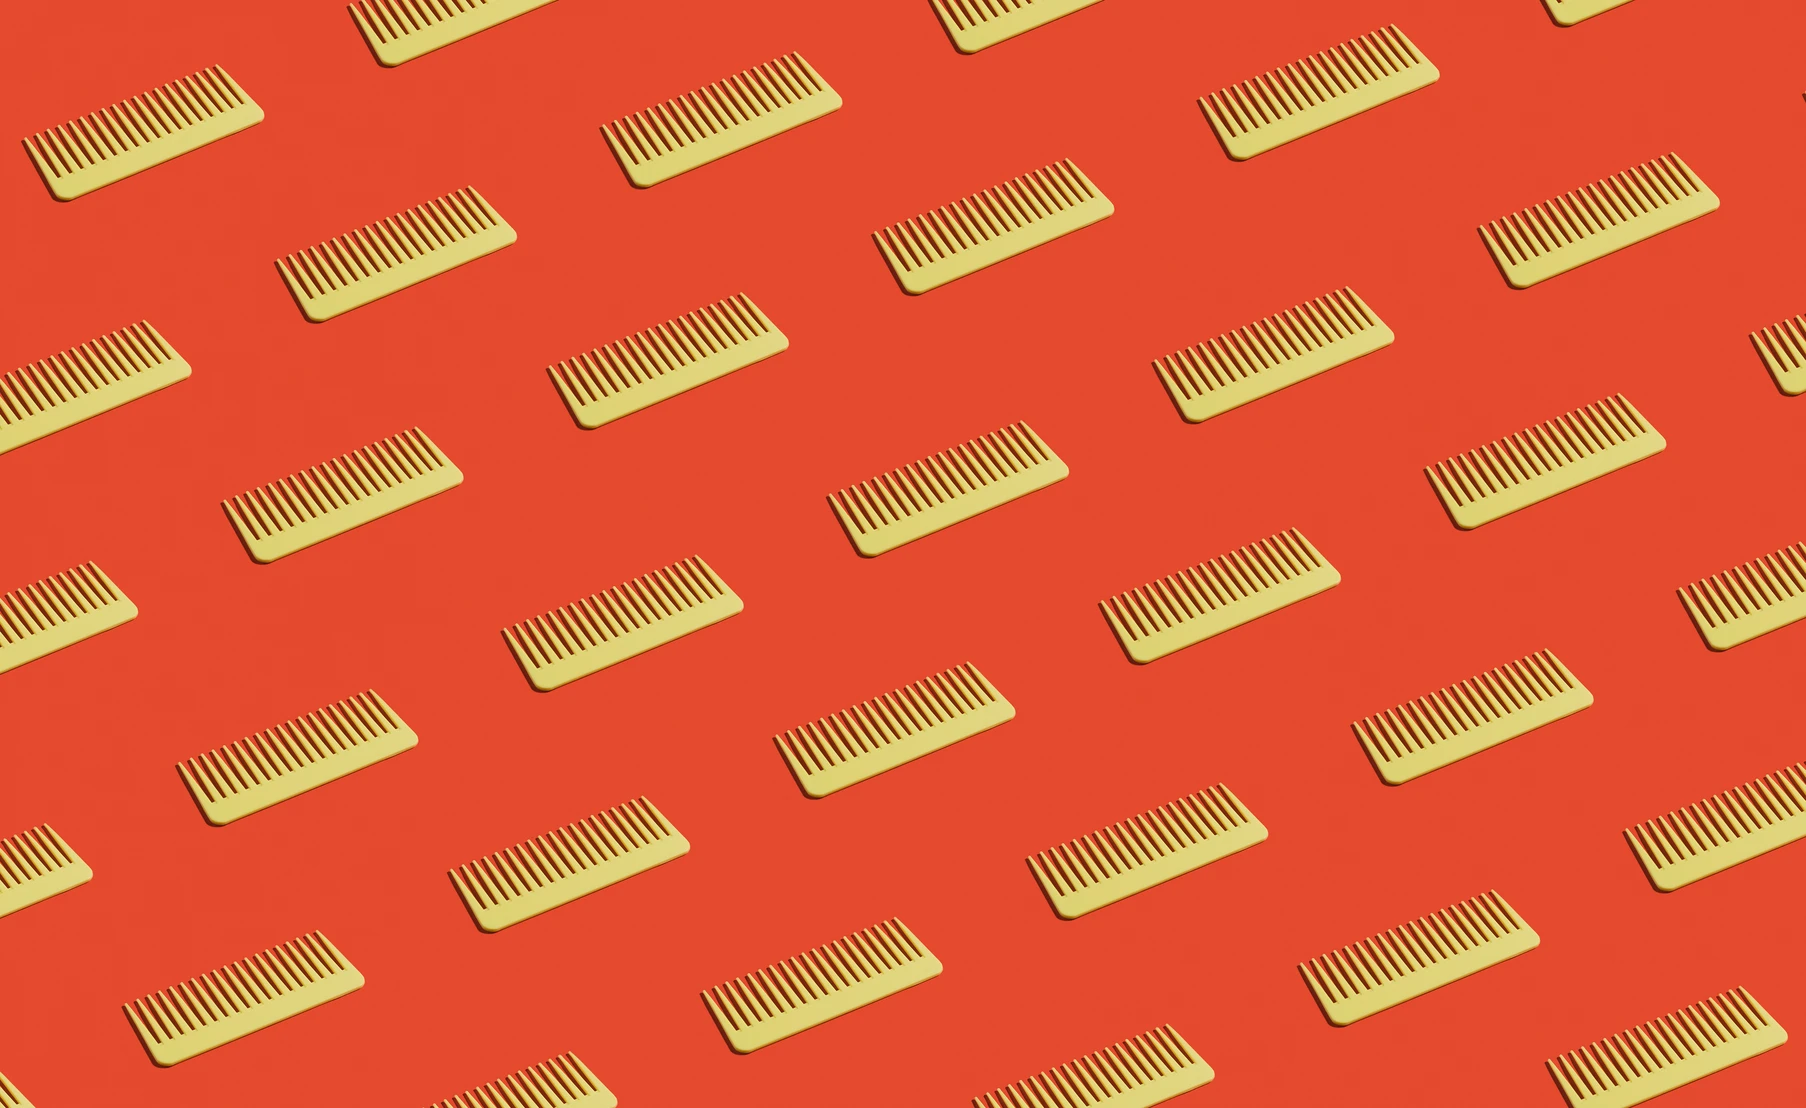 Repeating grid of yellow combs on red background. AW160 